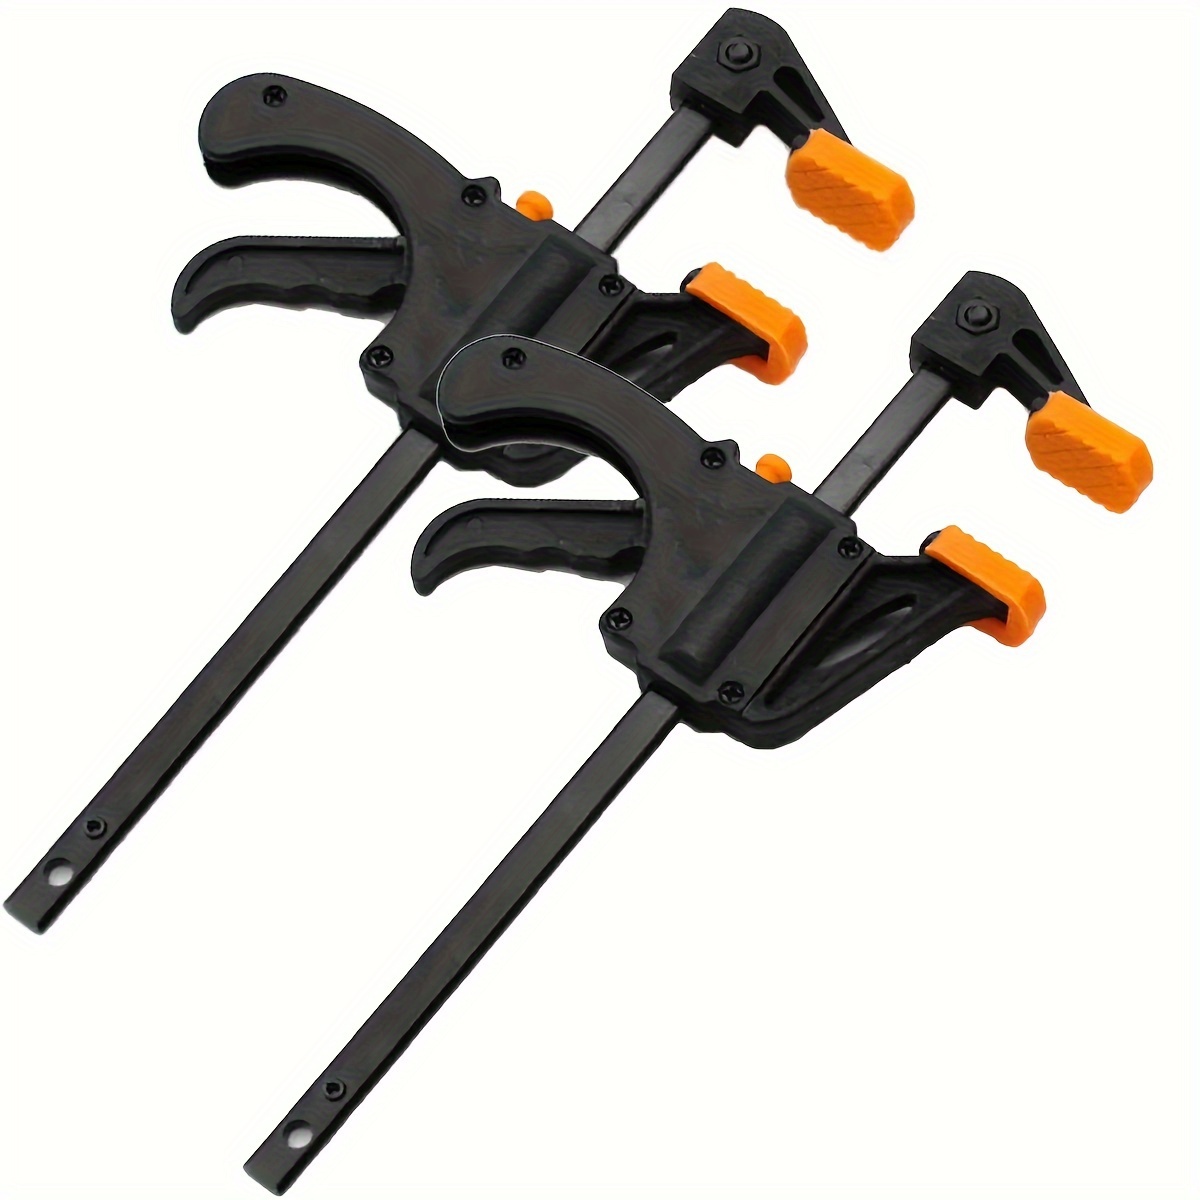 Bar Clamps For Woodworking Trigger Quick Grip Clamps One - Temu